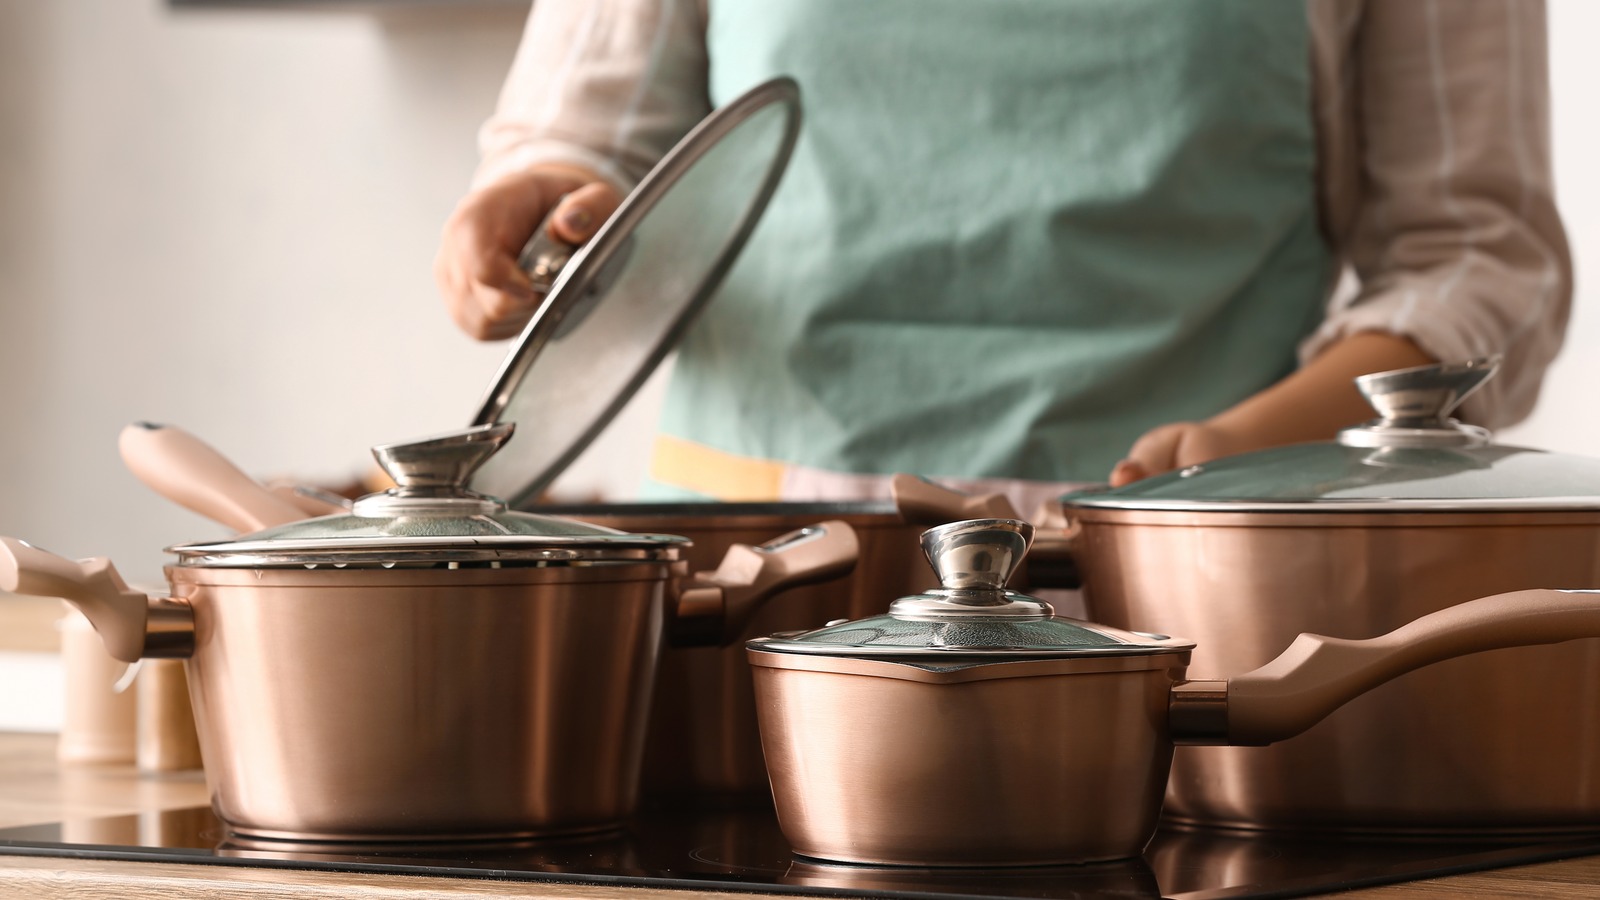 No, Saucepans And Pots Are Not The Same Thing